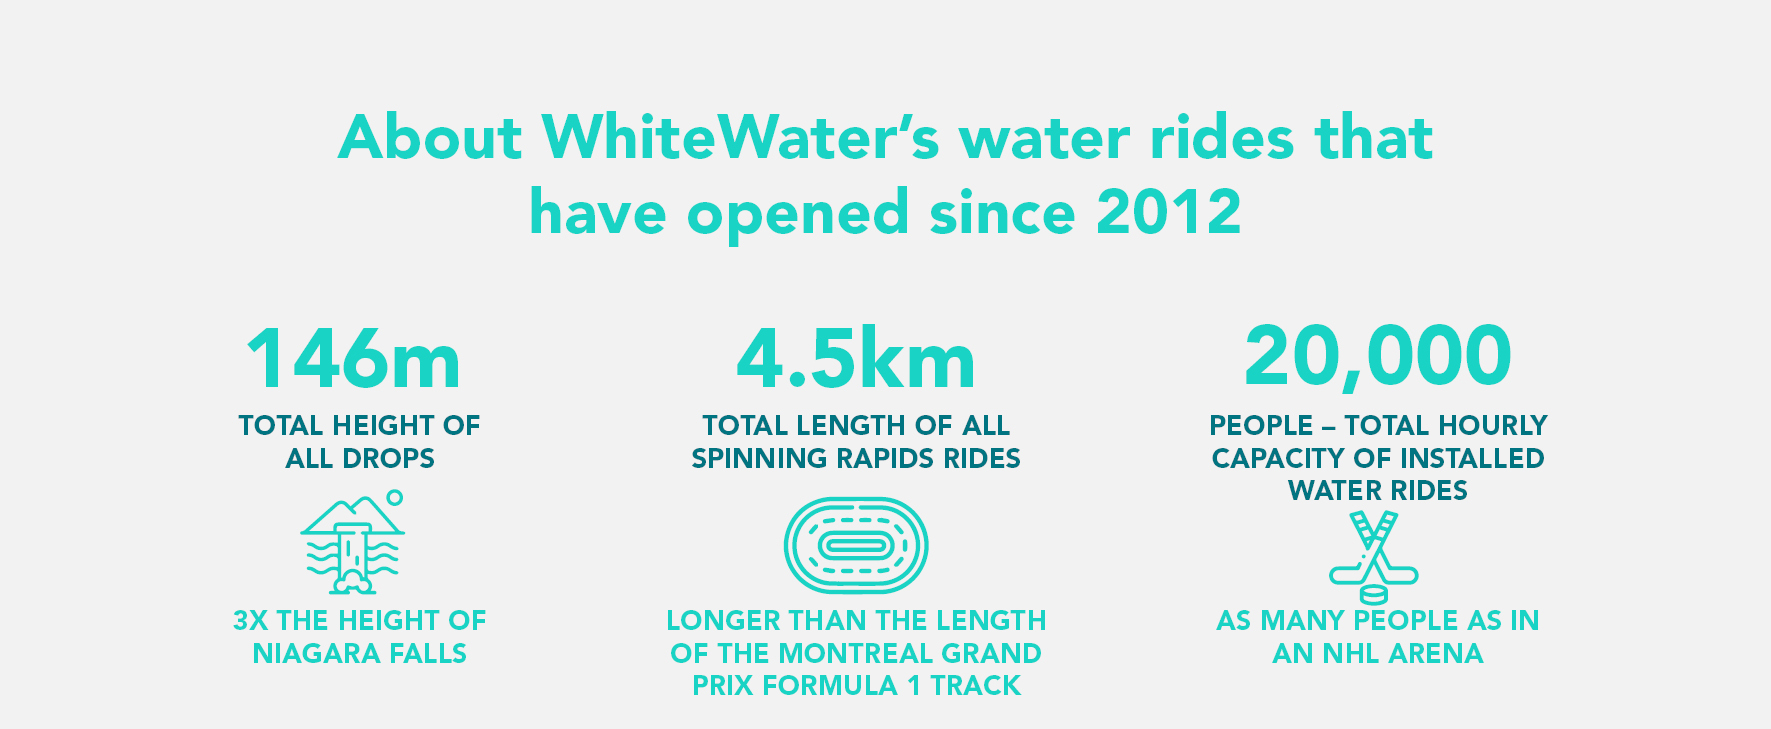 WhiteWater Water Rides fun facts